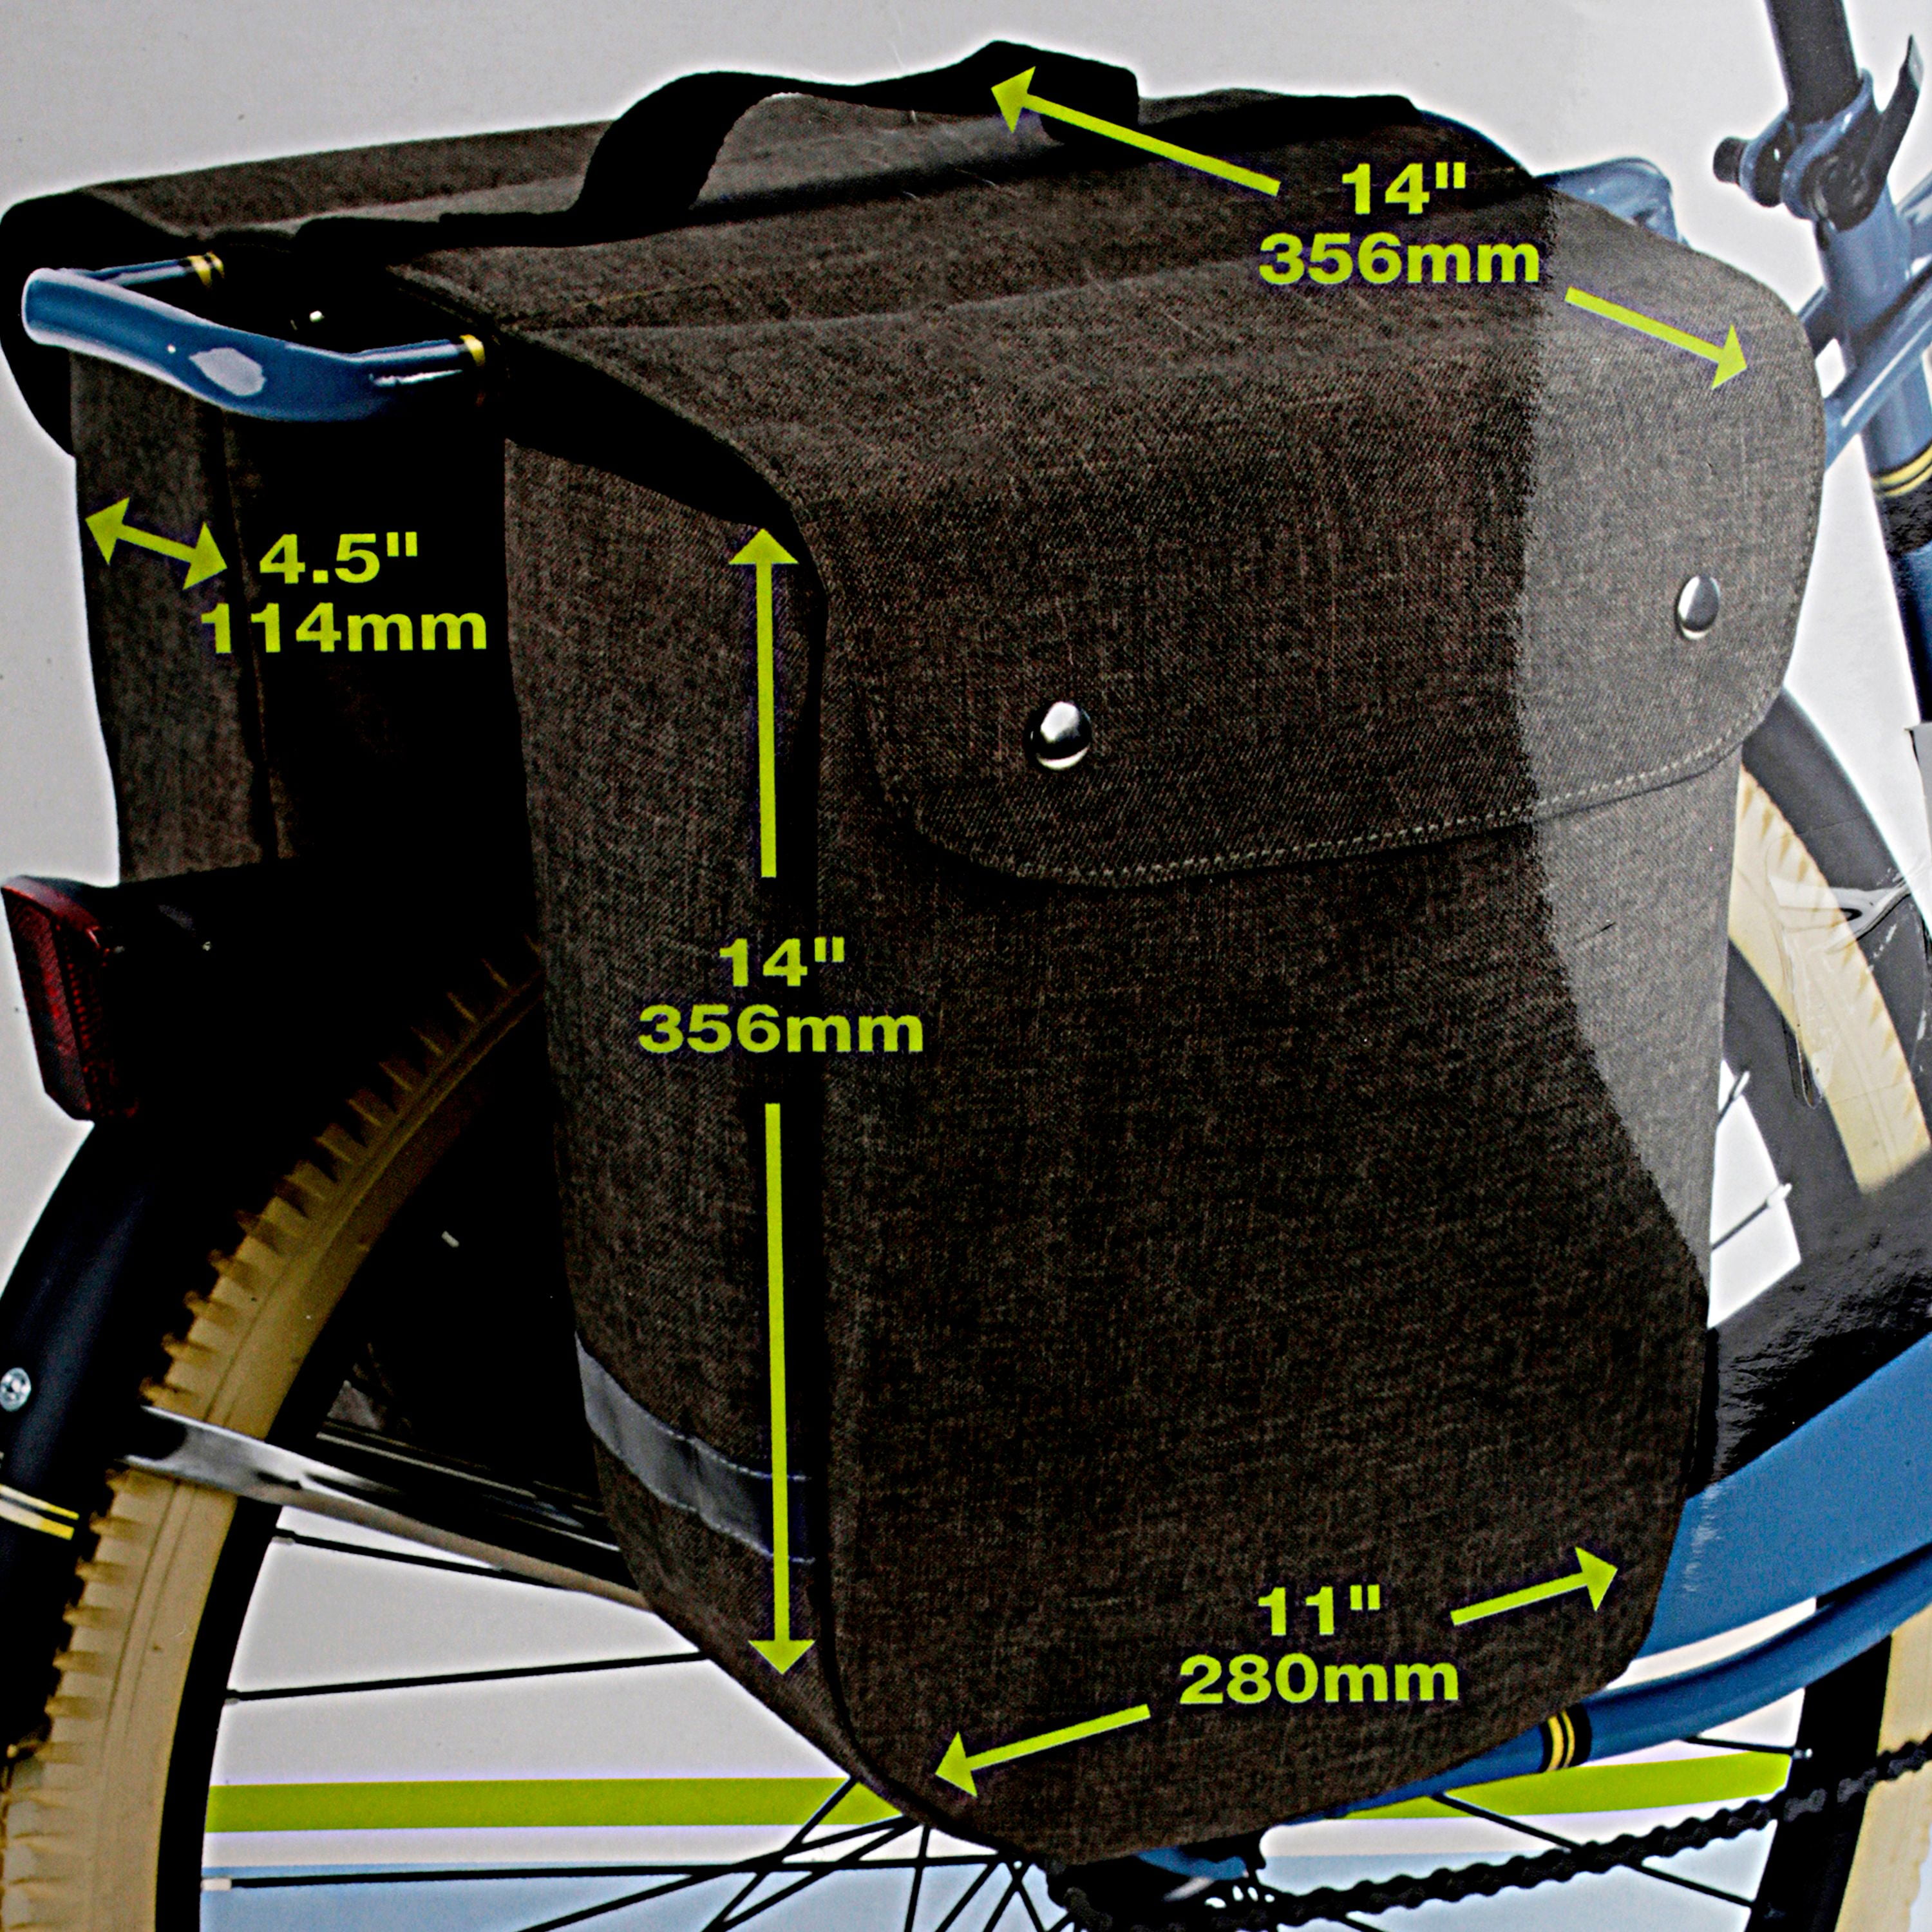 huffy roll up pannier